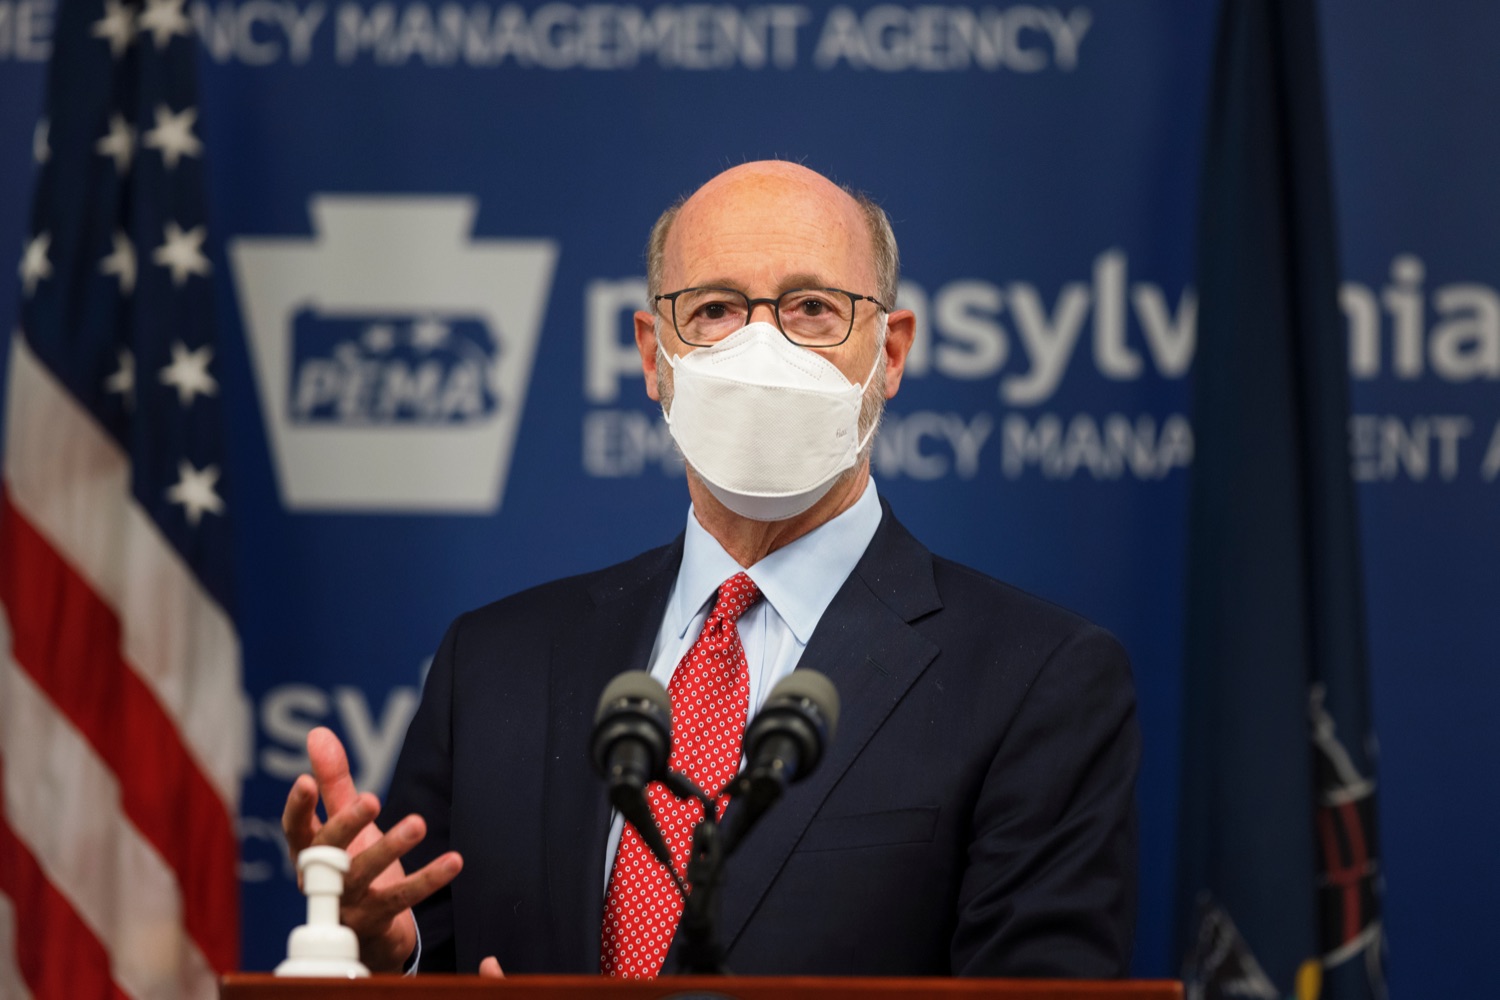 Governor Tom Wolf speaks during a press conference, which discussed the current state of COVID-19 and a new Secretary of Health order requiring masks to be worn inside K-12 school buildings, early learning programs and child care providers, inside Pennsylvania Emergency Management Agency in Harrisburg on Tuesday, August 31, 2021.<br><a href="https://filesource.amperwave.net/commonwealthofpa/photo/19089_GOV_School_Masking_NK_011.jpg" target="_blank">⇣ Download Photo</a>